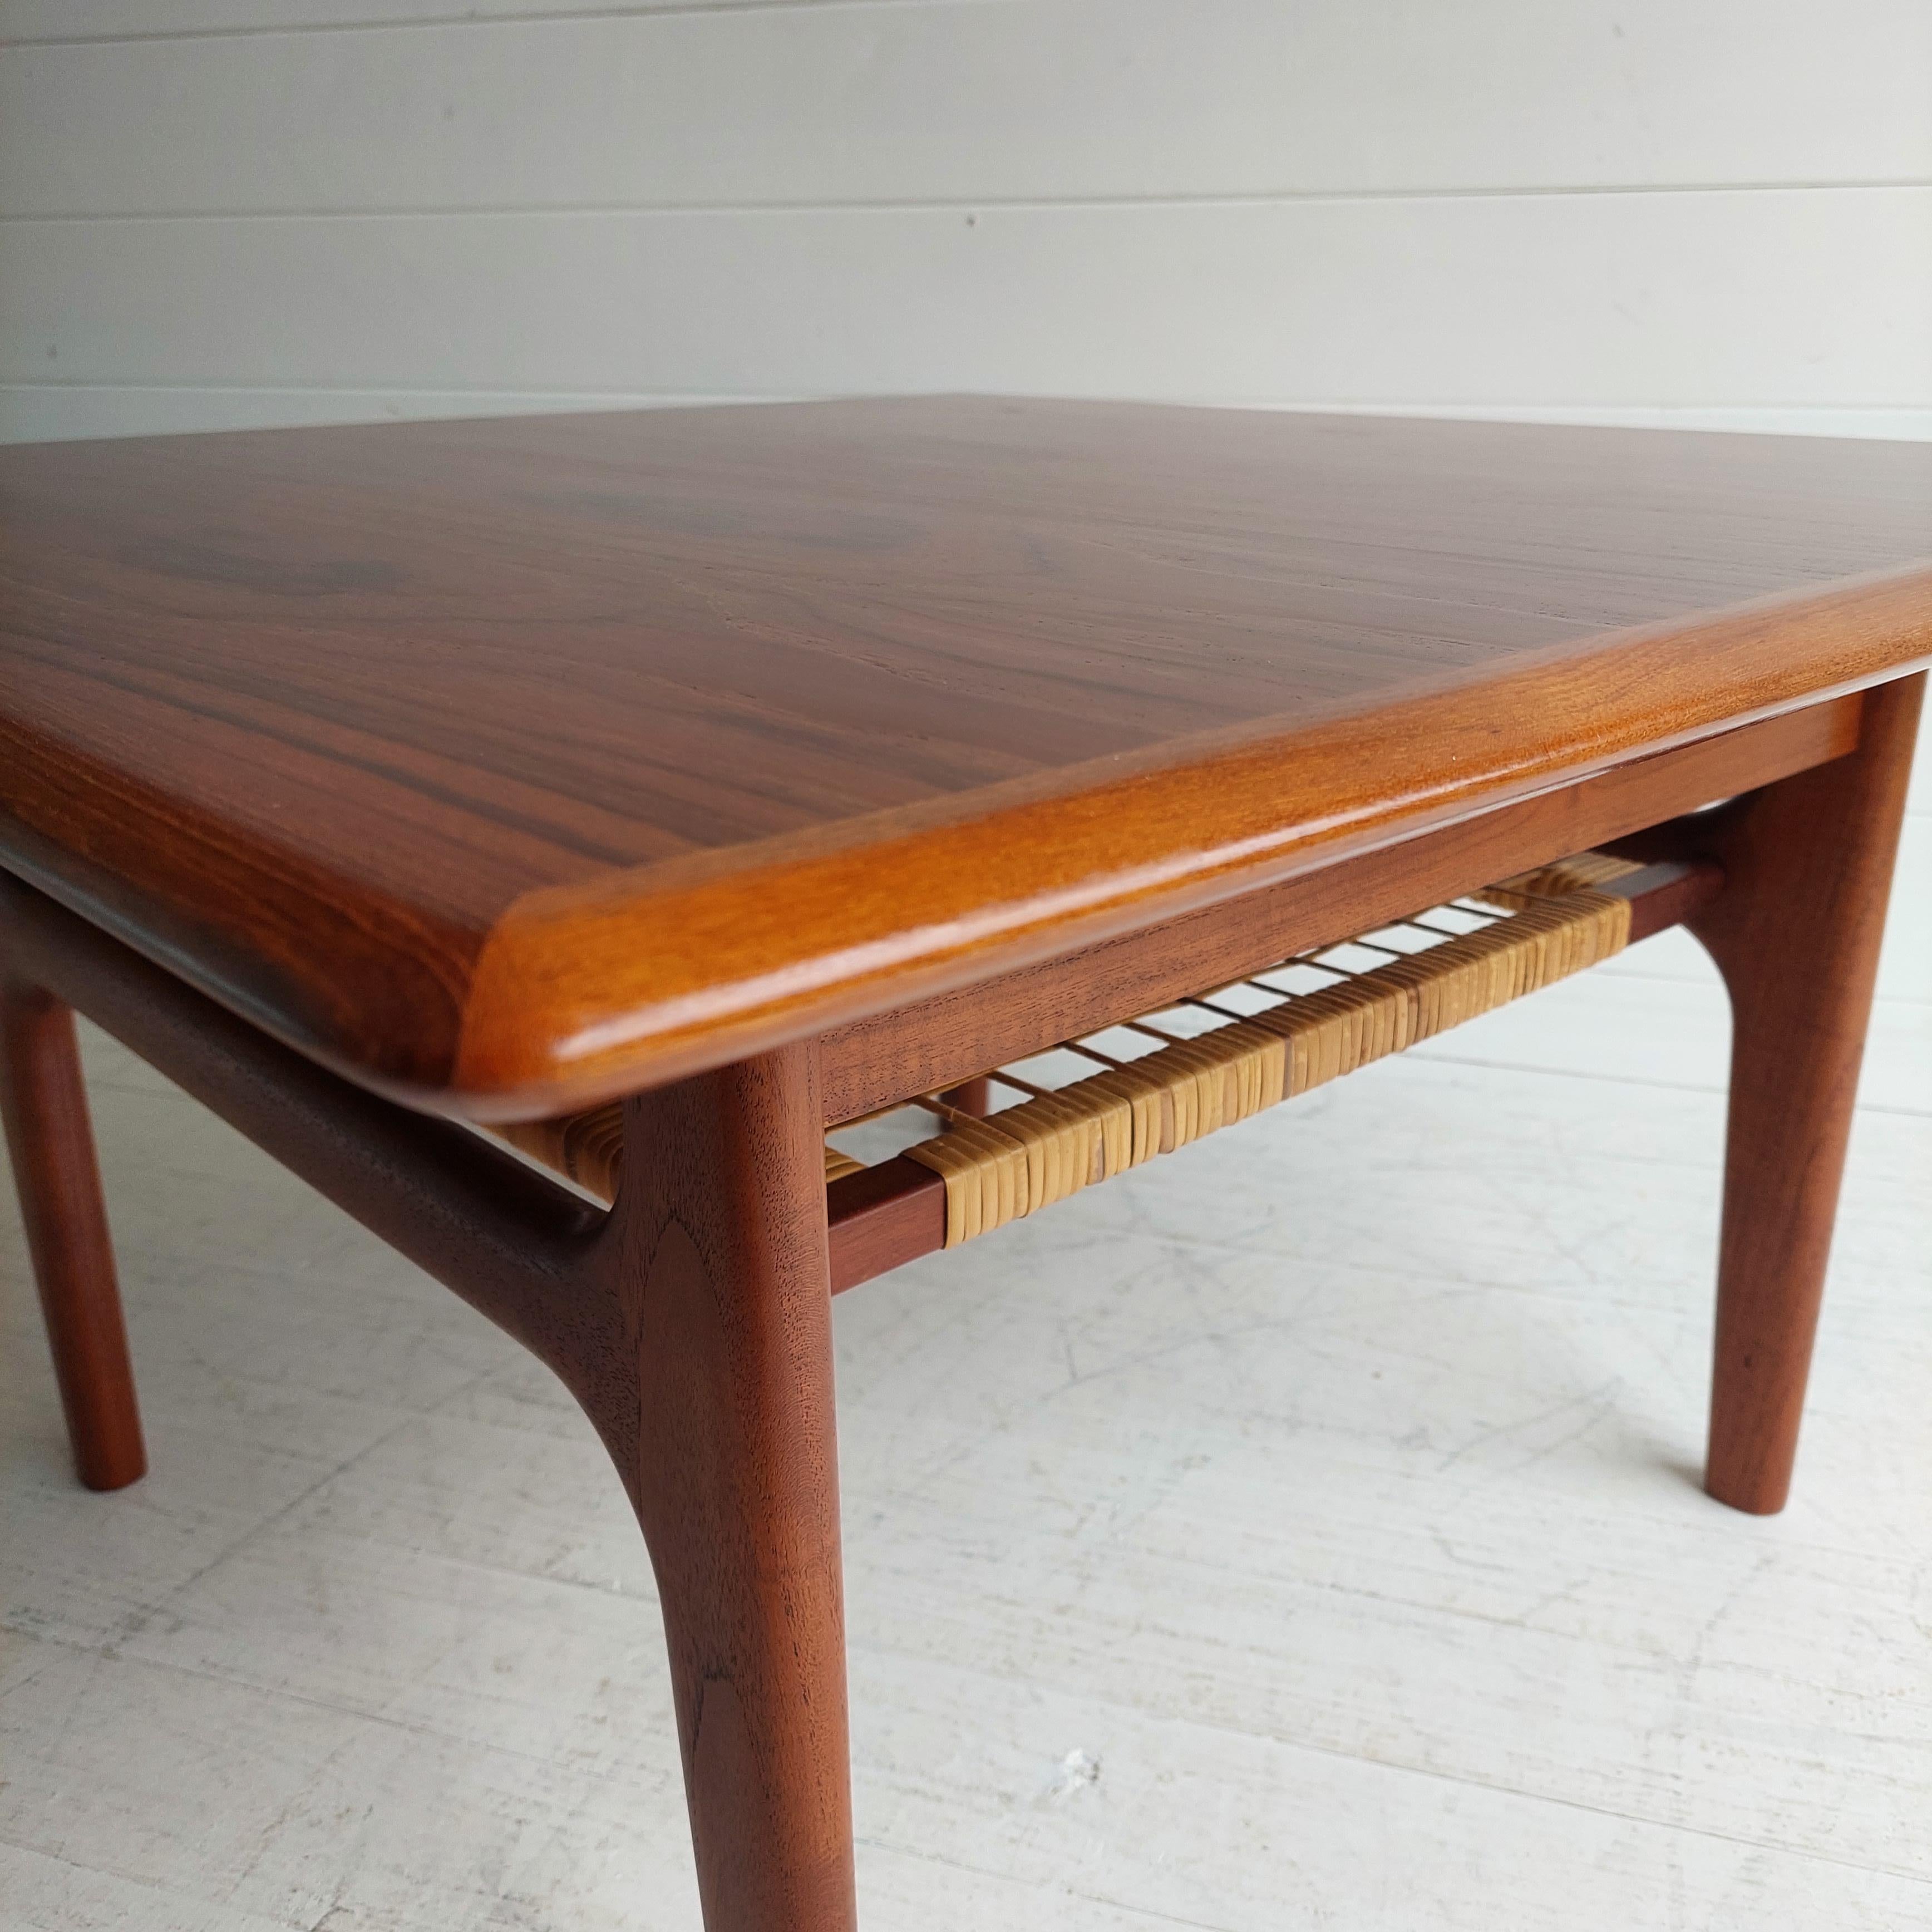 Midcentury Danish 1960s Teak and Cane Coffee Table by Trioh Møbler 1